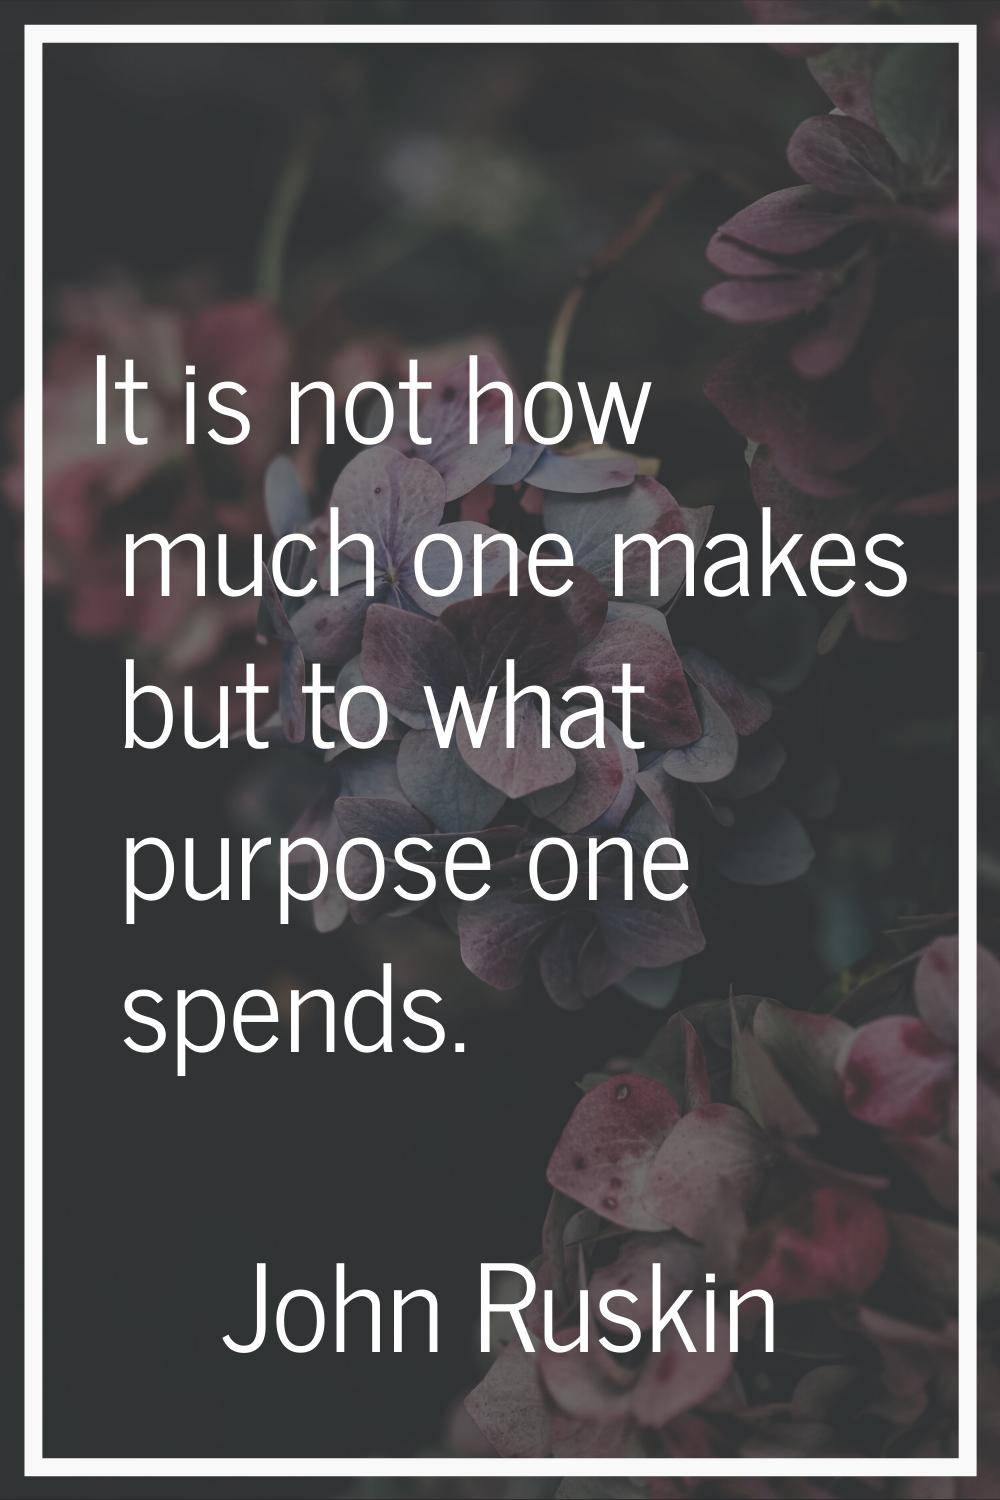 It is not how much one makes but to what purpose one spends.